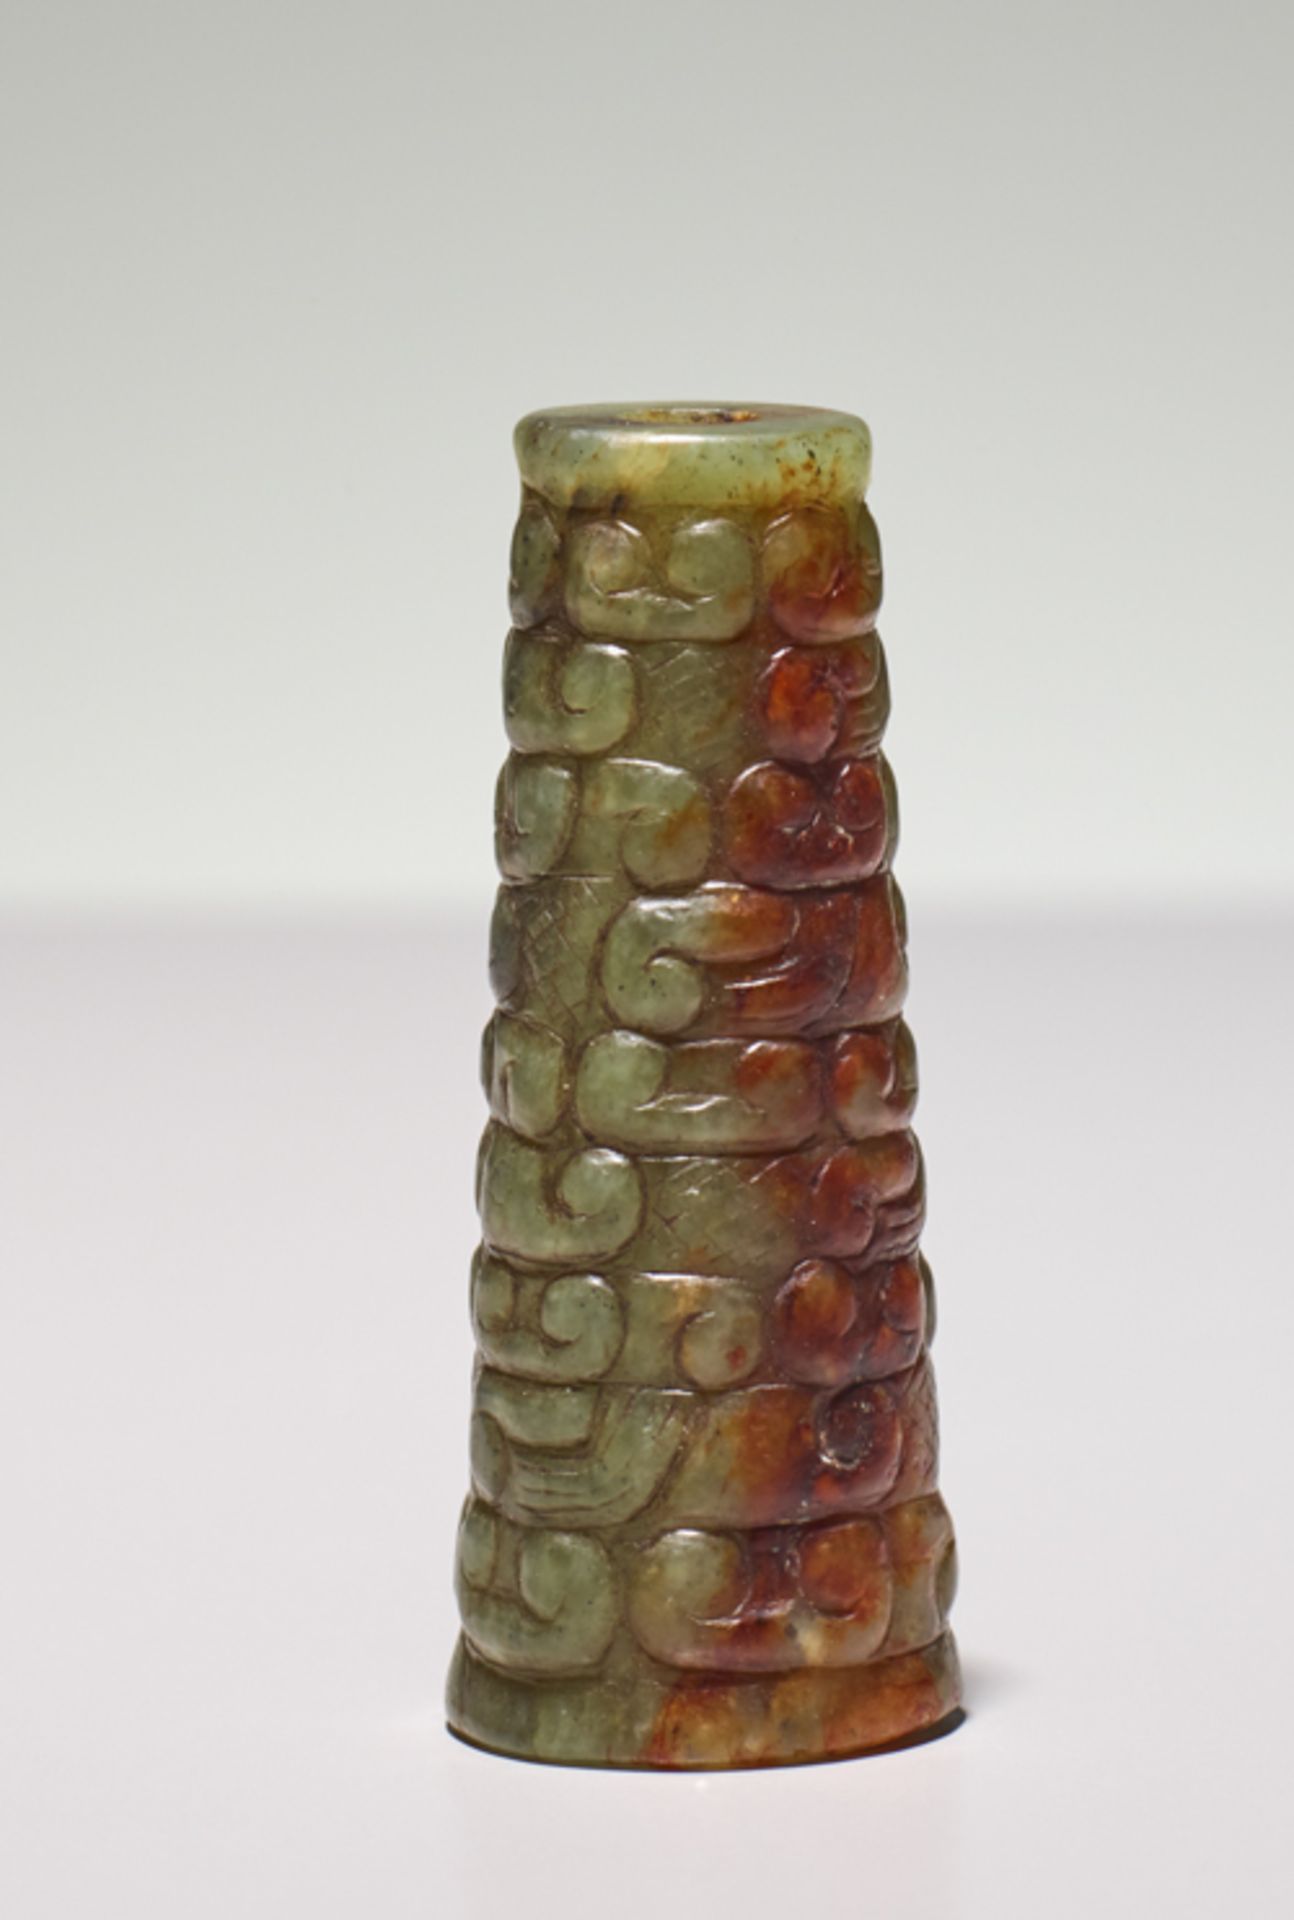 CONICAL BEADJade. China, Eastern Zhou, 5th century BCDuring the Eastern Zhou period, beads like this